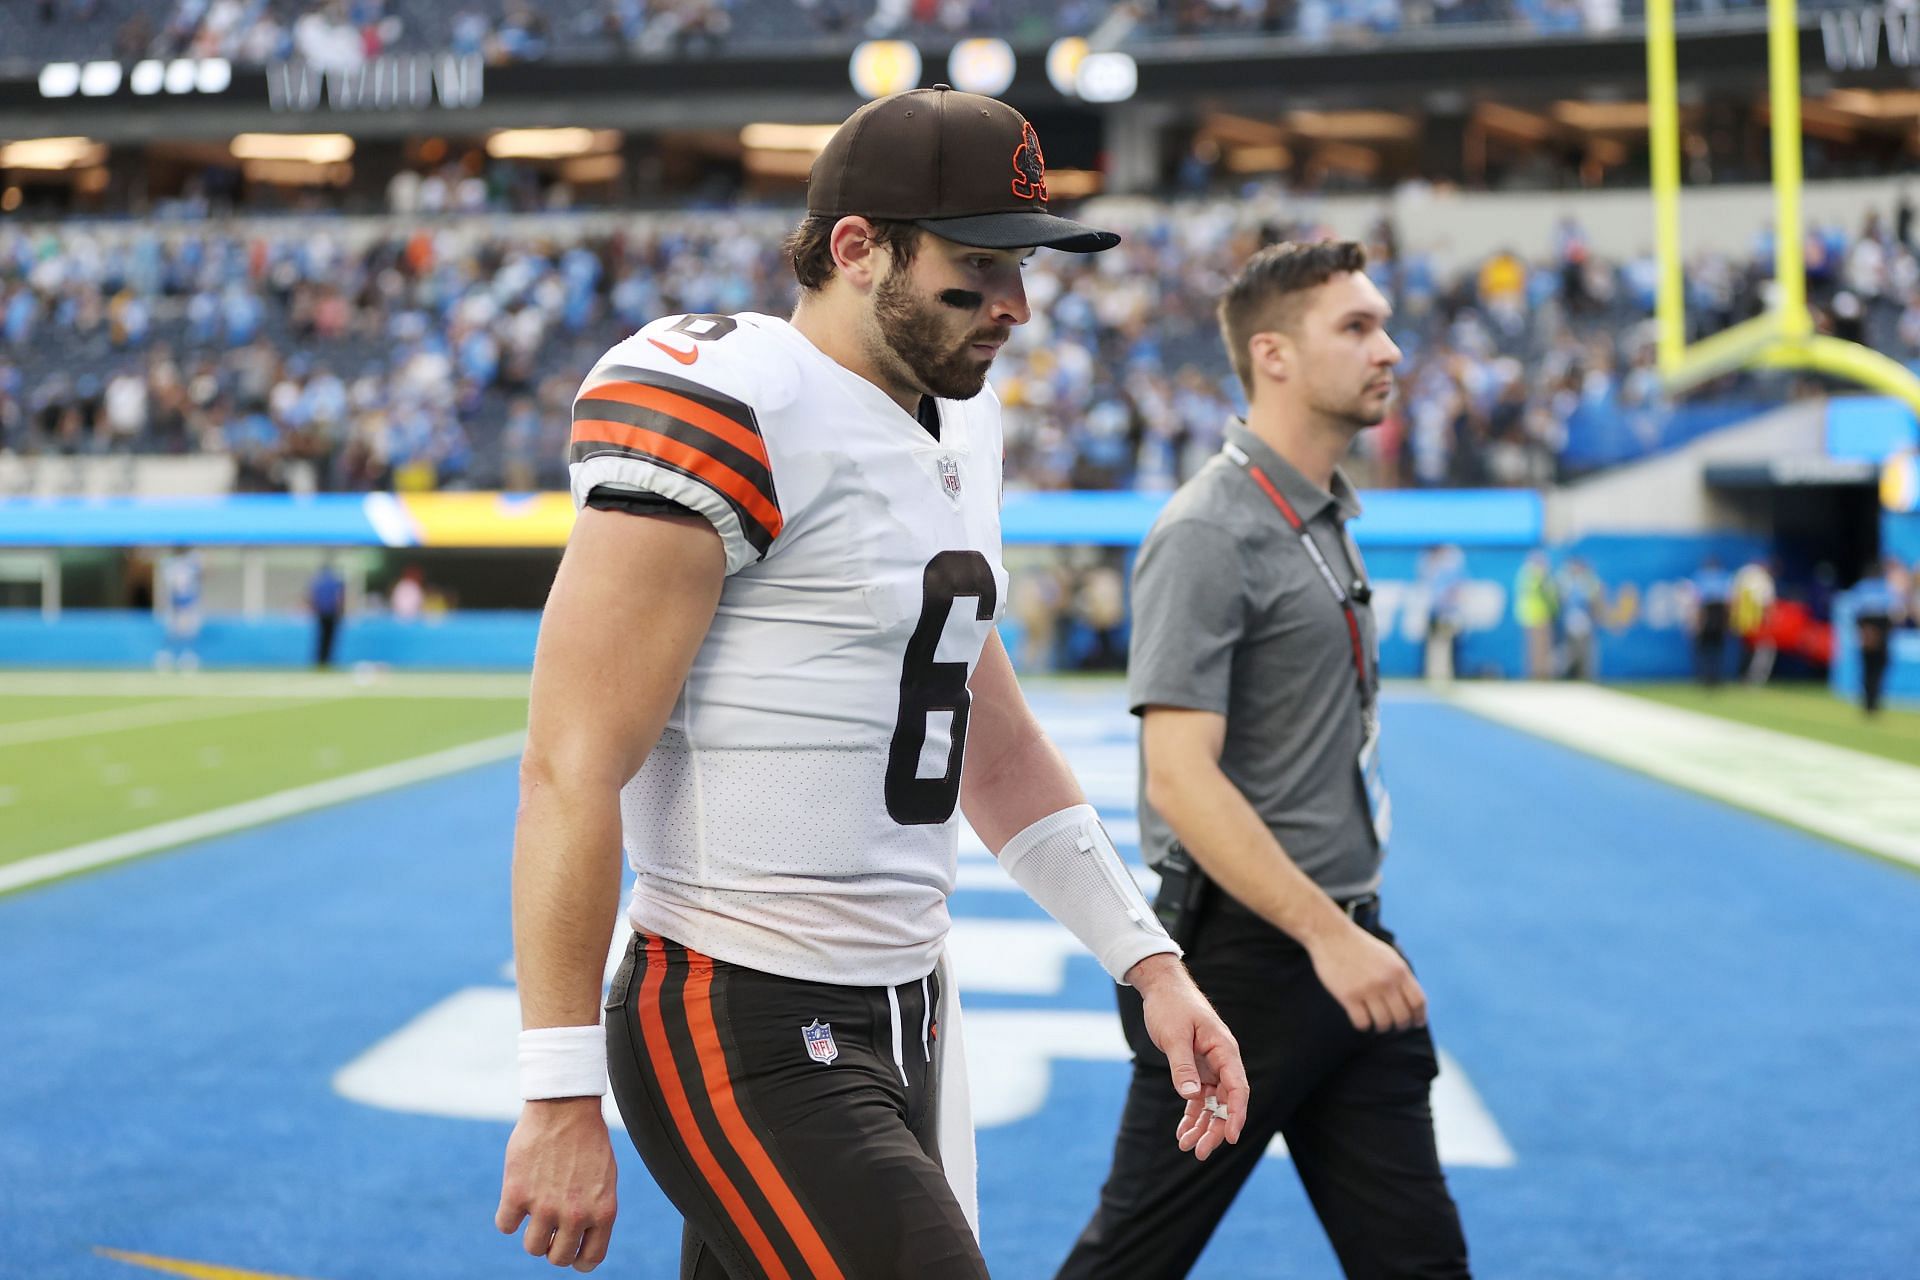 Cleveland Browns v Los Angeles Chargers